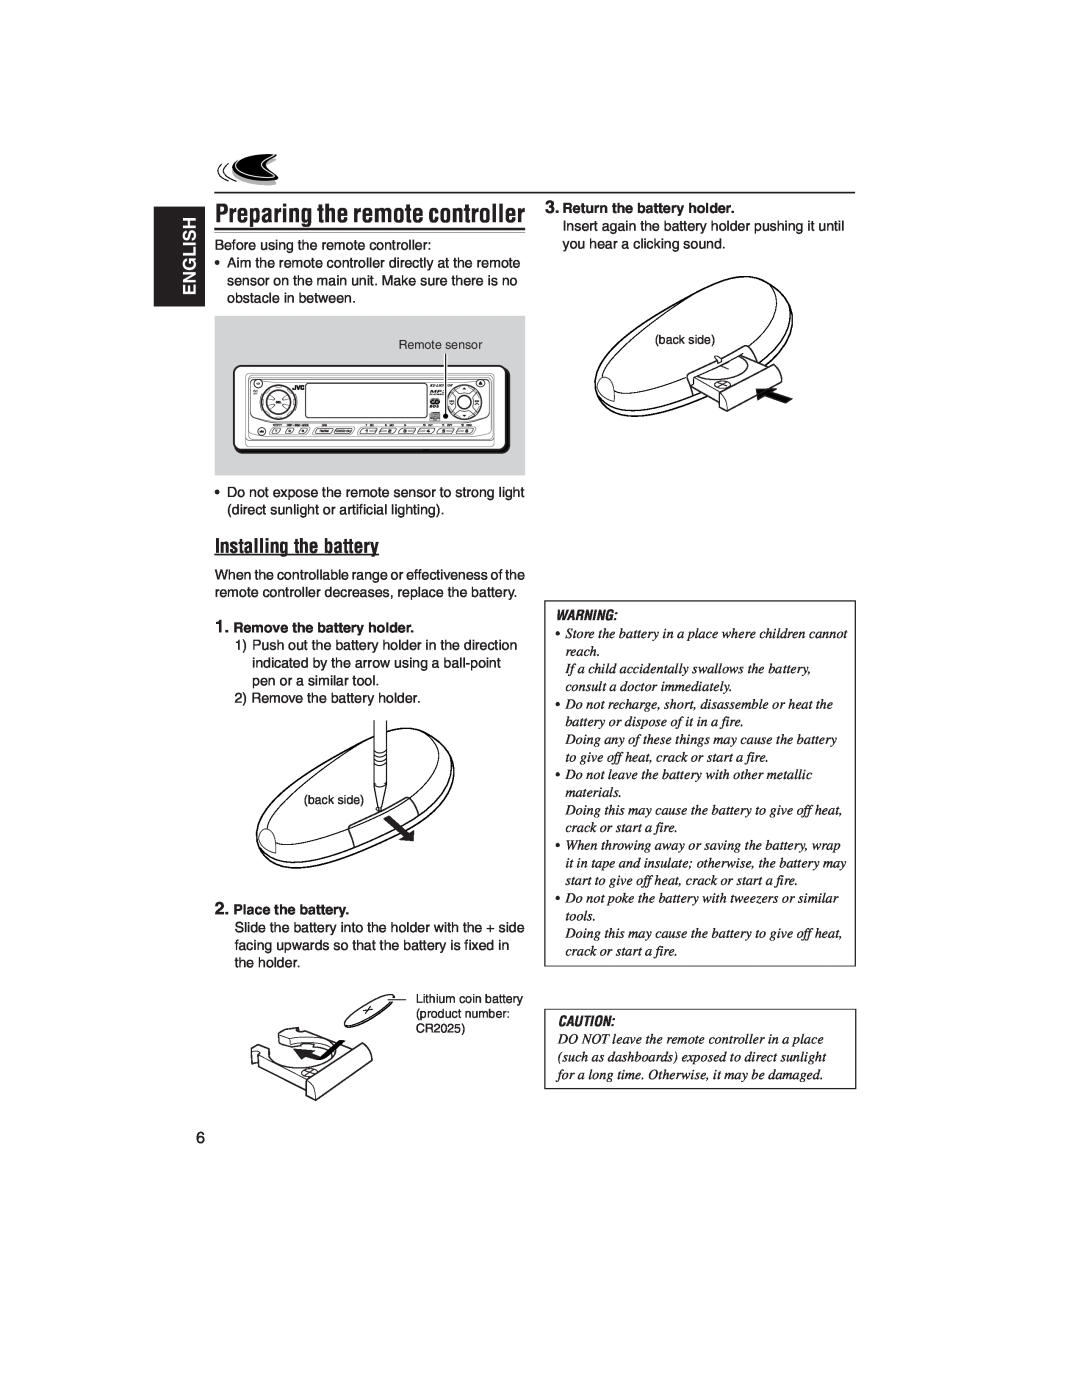 JVC KD-LH2000R manual Preparing the remote controller, Installing the battery, English, Remove the battery holder 